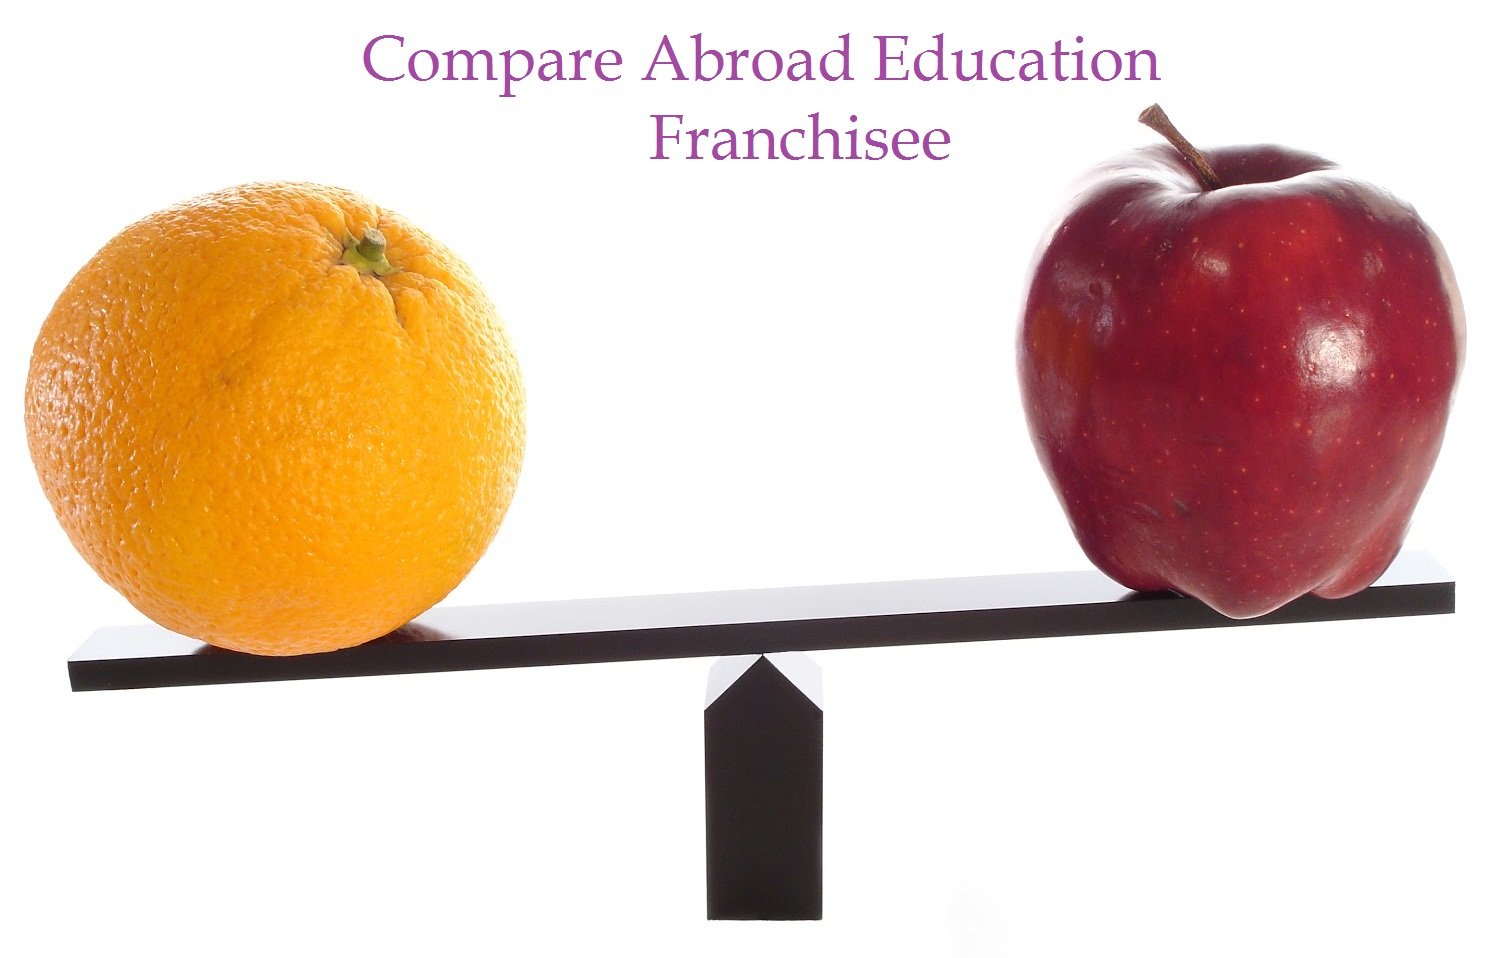 Compare Abroad Education Franchisee with other Franchisees